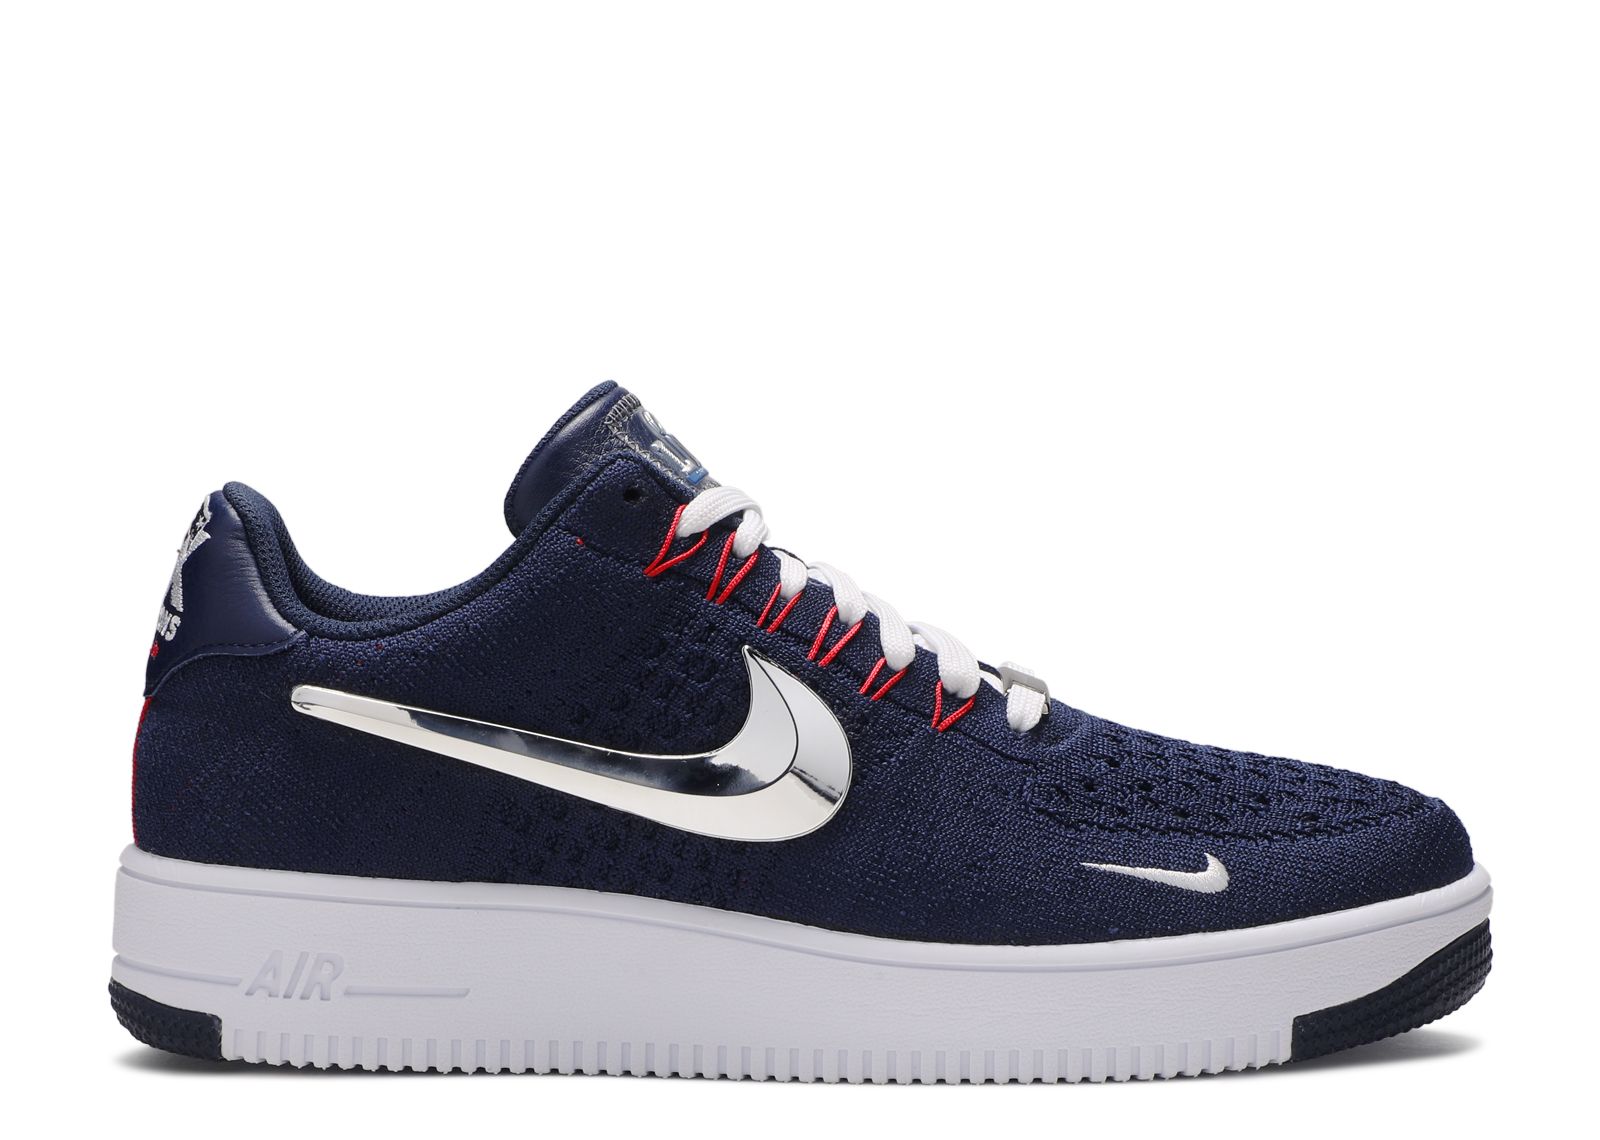 nike air force 1 ultra flyknit patriots 6x champs